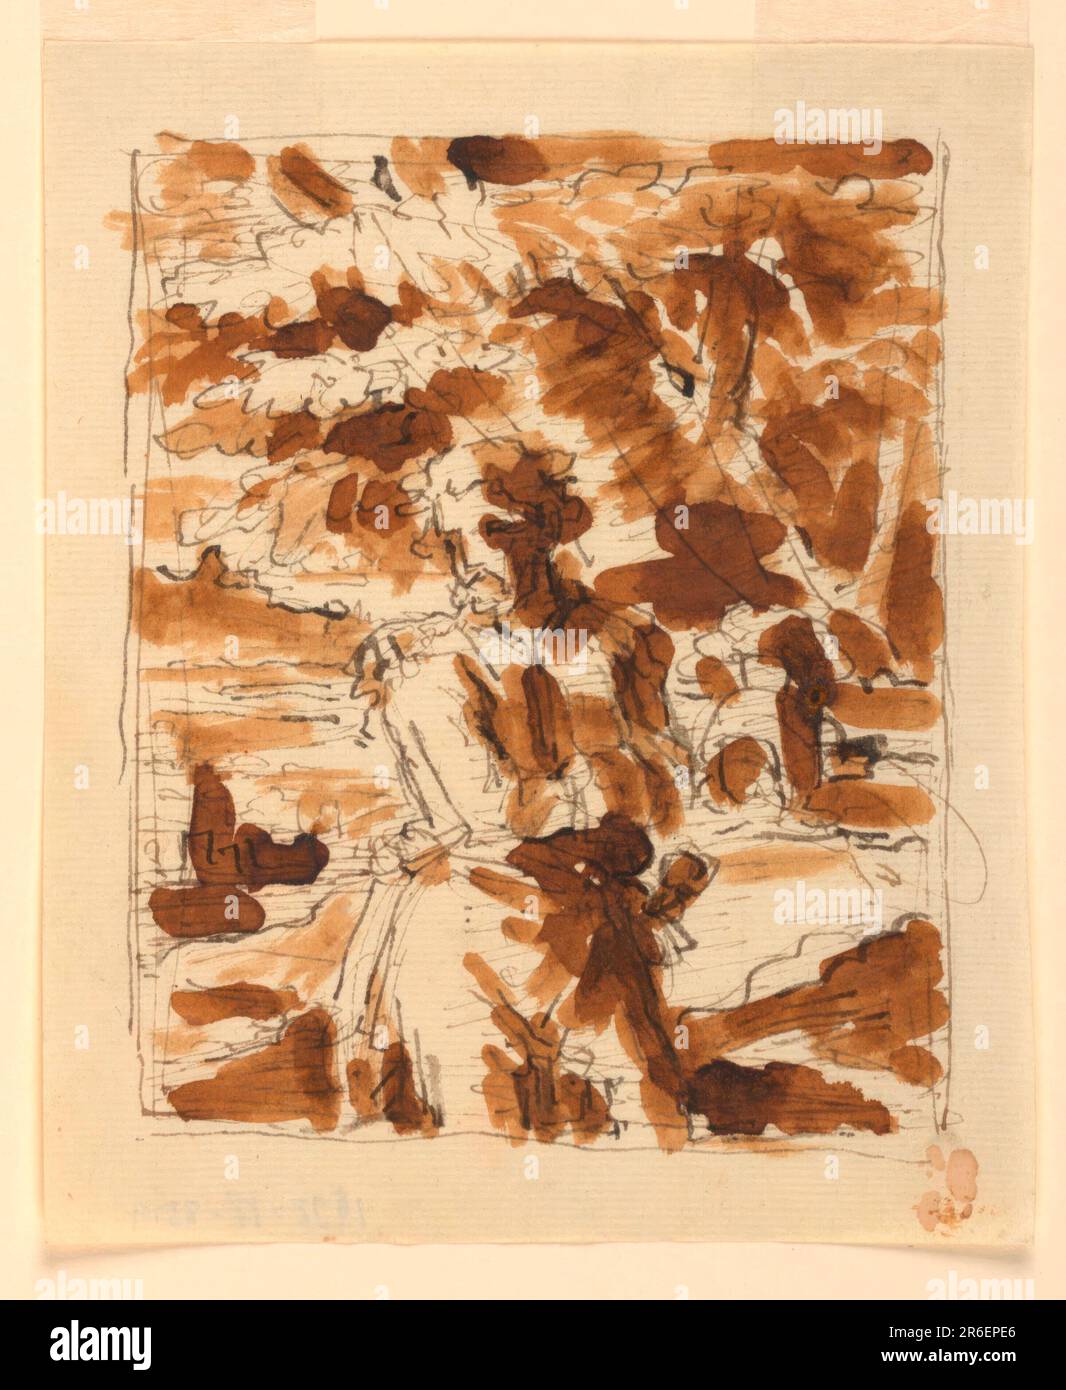 Sketch, Classical Male Figure in Landscape. Pen and ink, brush and sepia wash on paper. Date: 1820-1850. Museum: Cooper Hewitt, Smithsonian Design Museum. Stock Photo